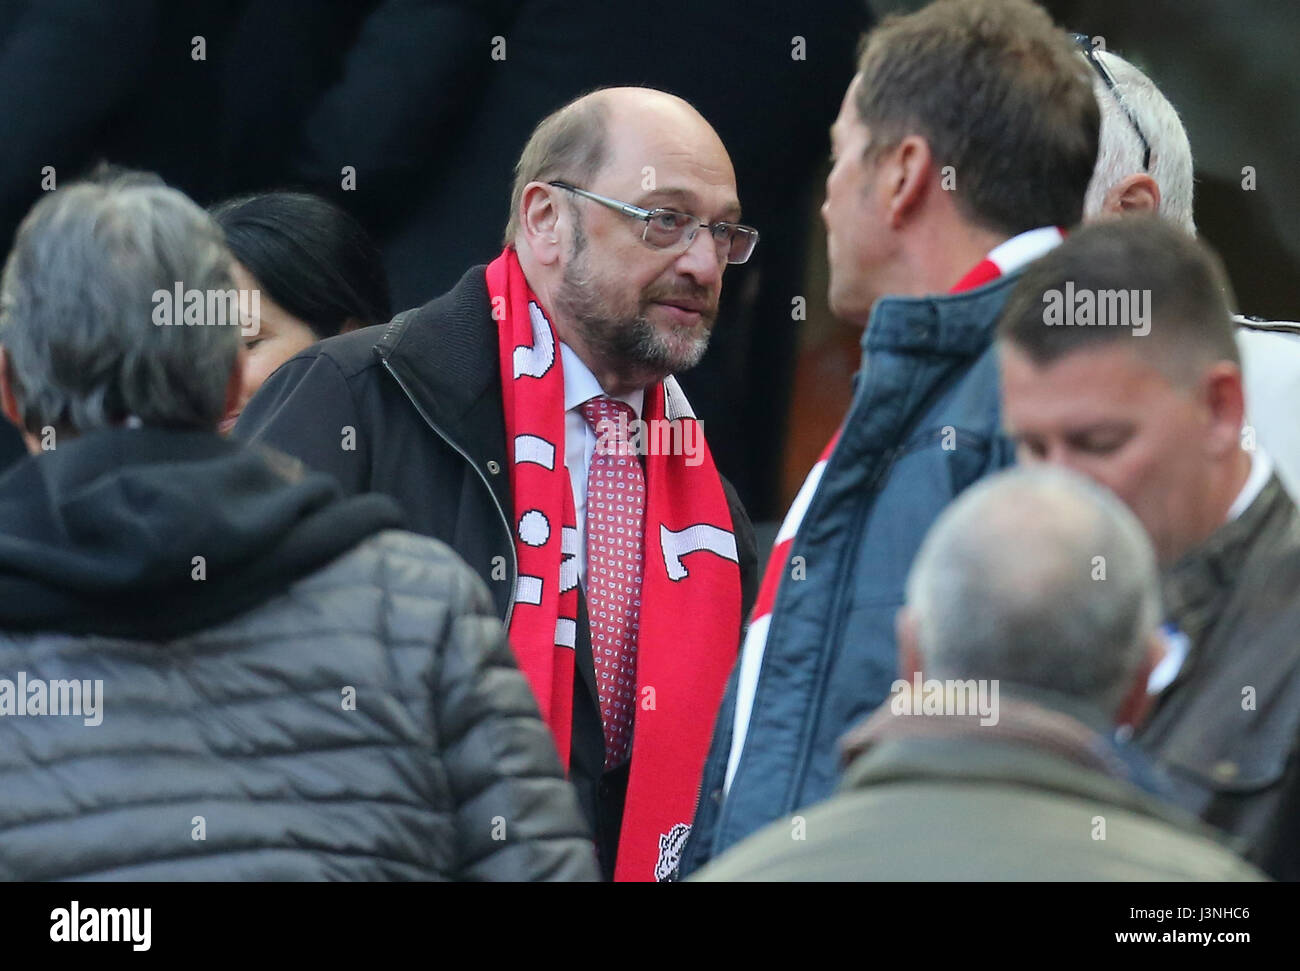 Cologne, Germany, 5th May 2017, Bundesliga matchday 32, 1. FC Koeln vs Werder Bremen: Social democratic candidate for Chancellorship Martin Schulz (C) wears a Cologne scarf.       Credit: Juergen Schwarz/Alamy Live News Stock Photo